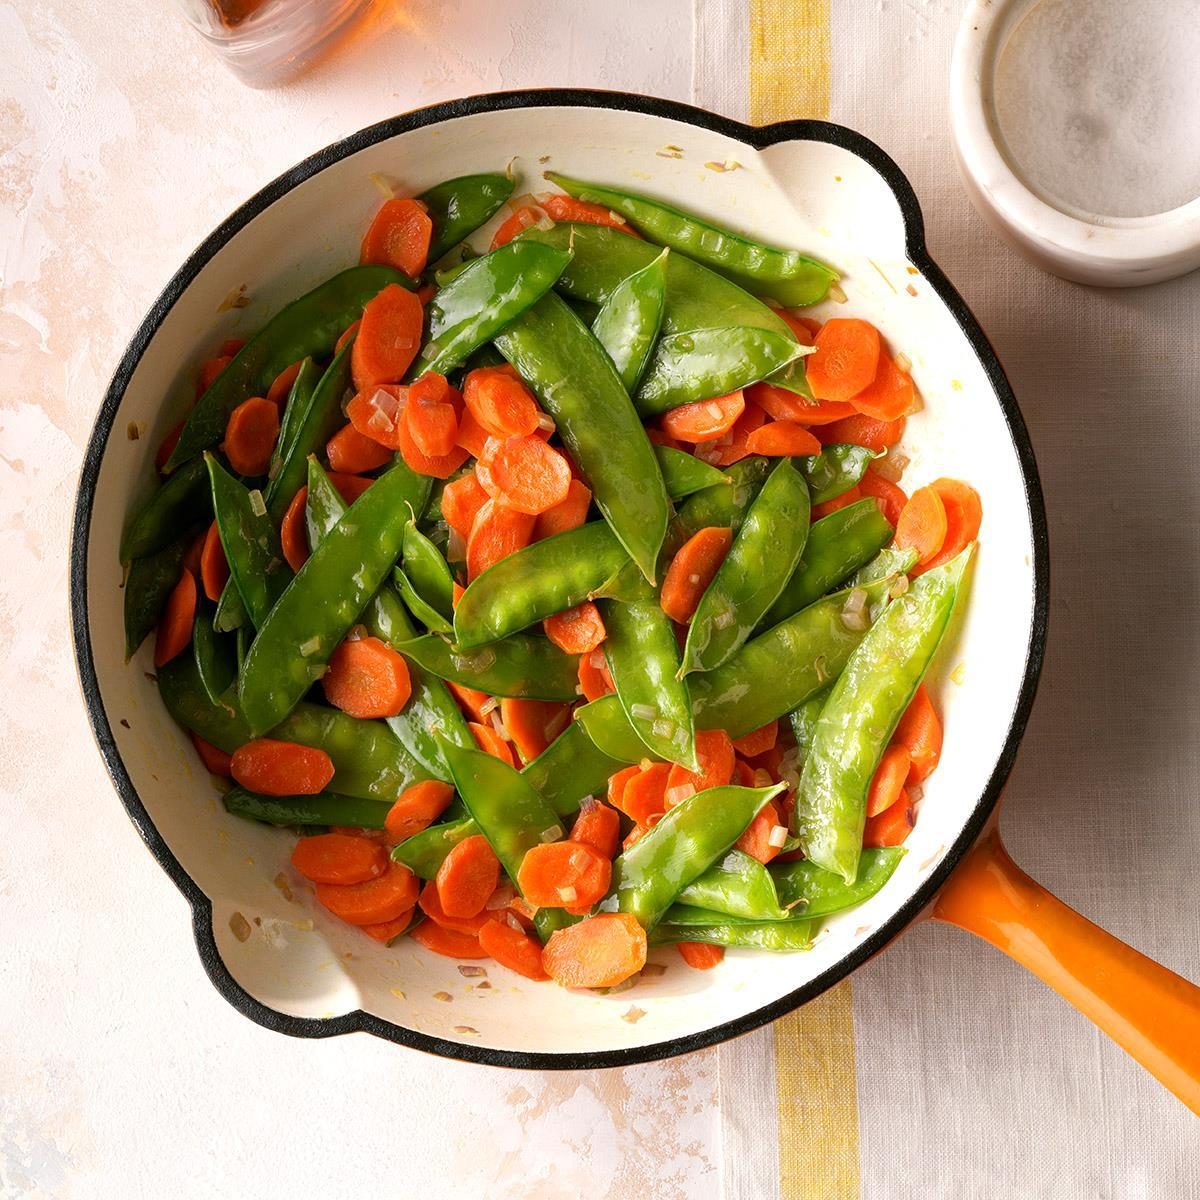 Carrots and Snow Peas